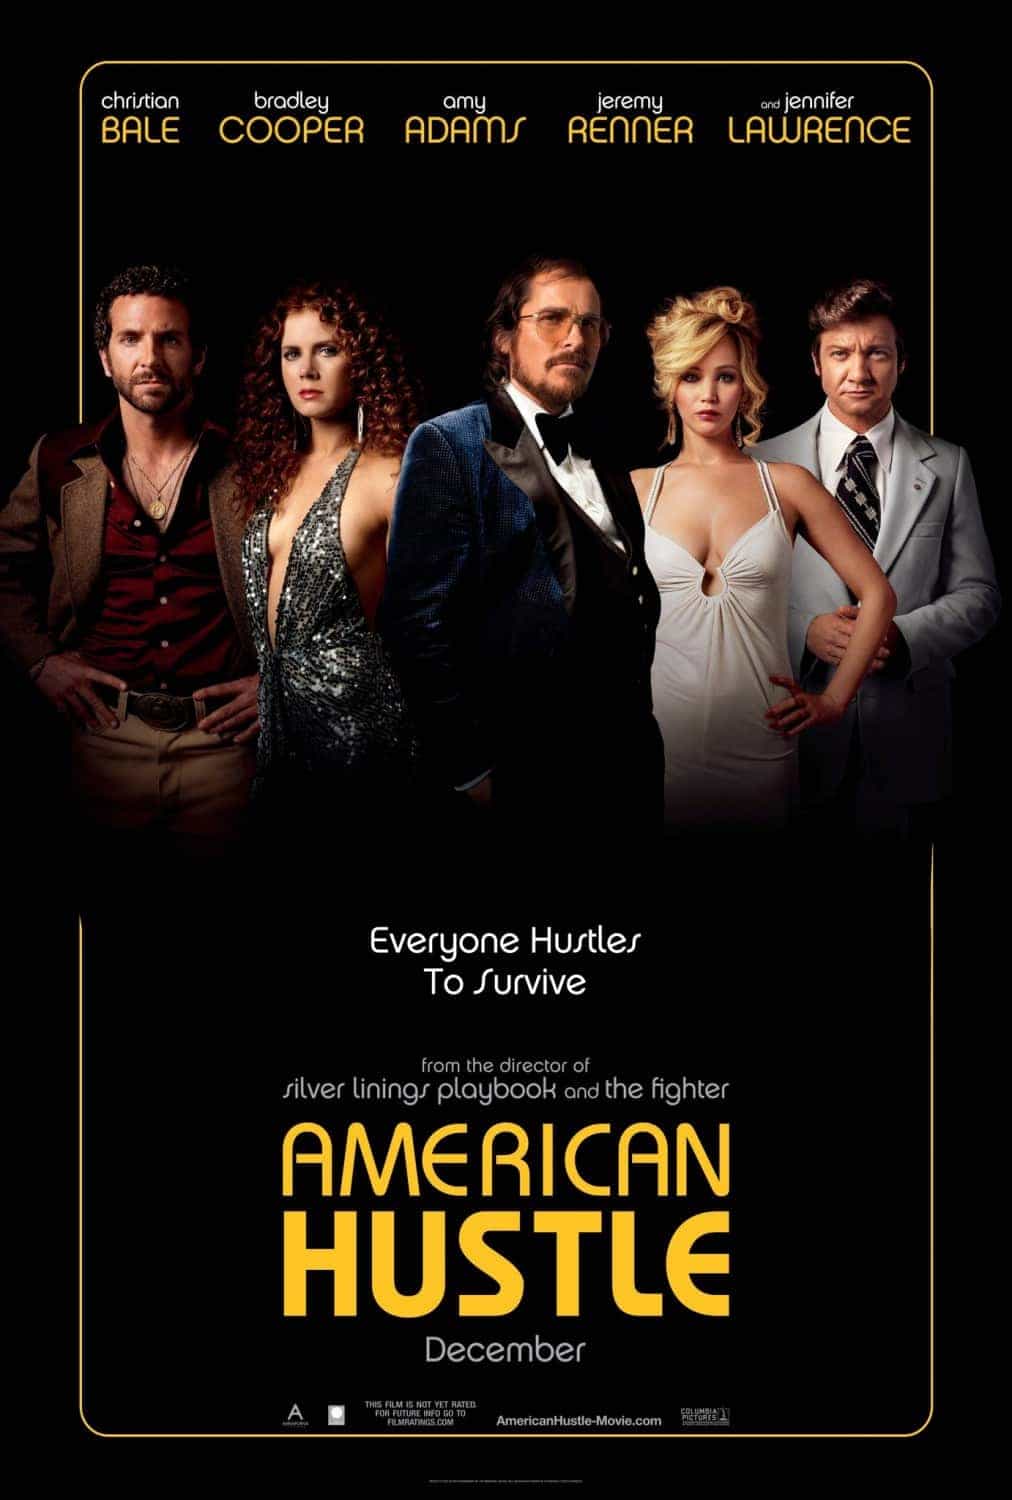 UK Box Office Weekend Report 3rd - 5th January 2014:  American Hustle climbs to number 1 after going wide in the UK